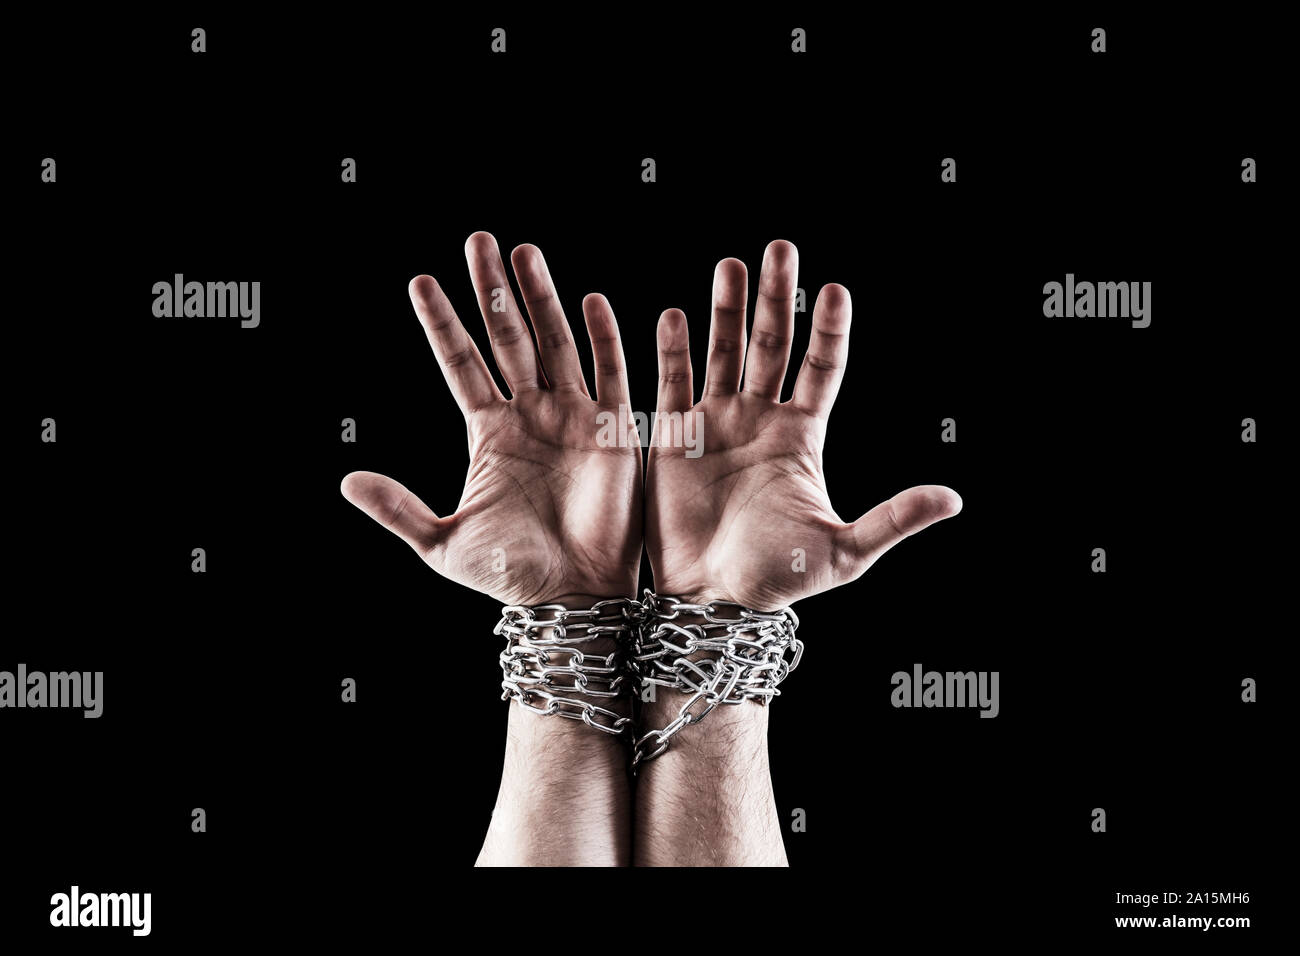 black hands breaking out of chains